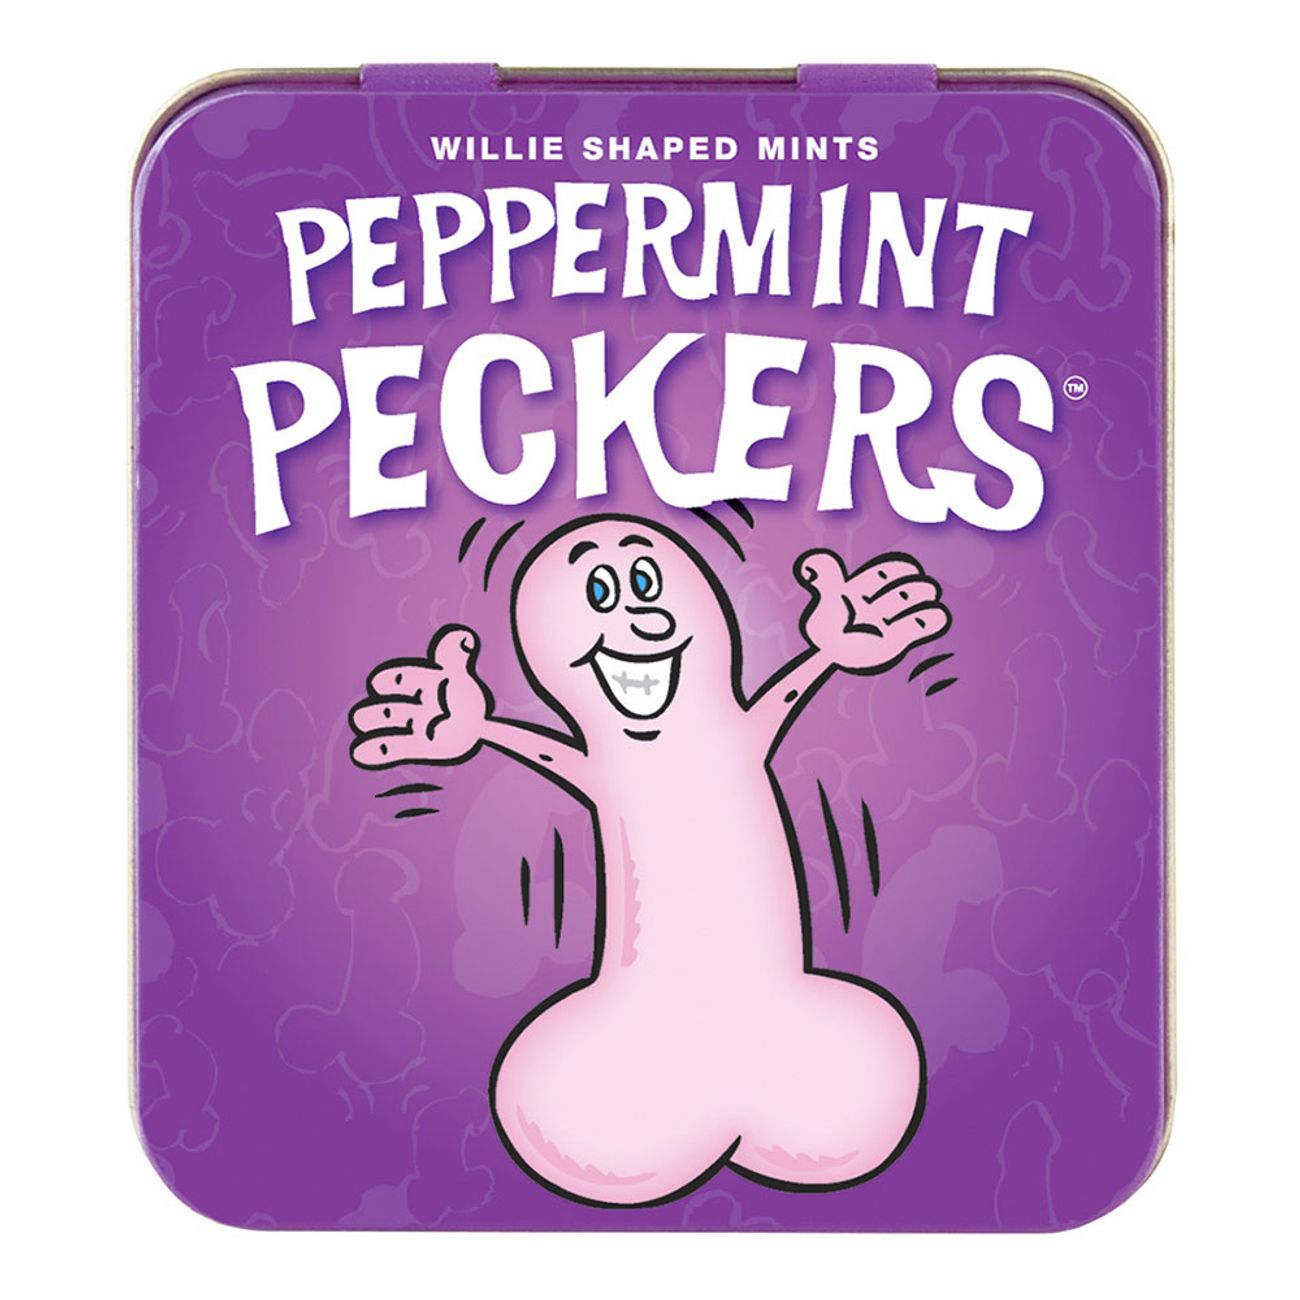 peppermint-peckers-1